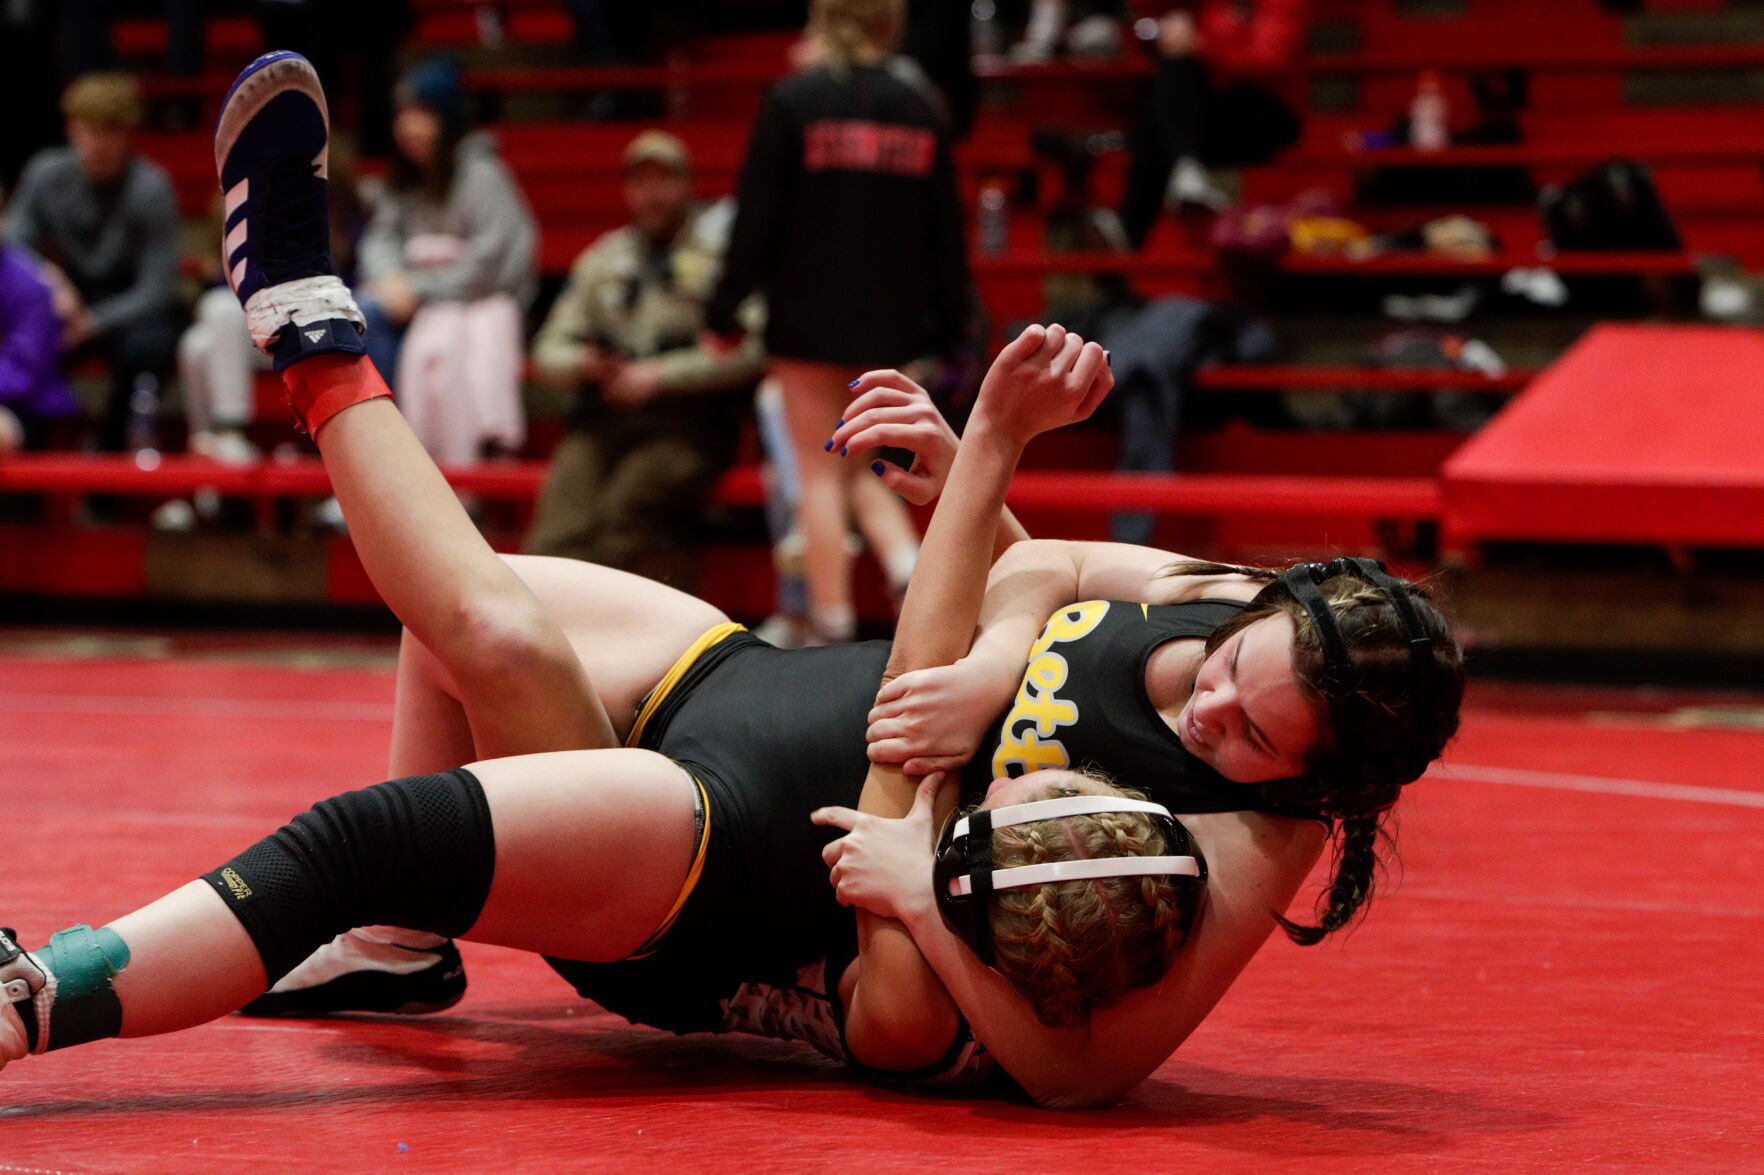 A new era Bettendorf captures first sanctioned girls wrestling event in picture